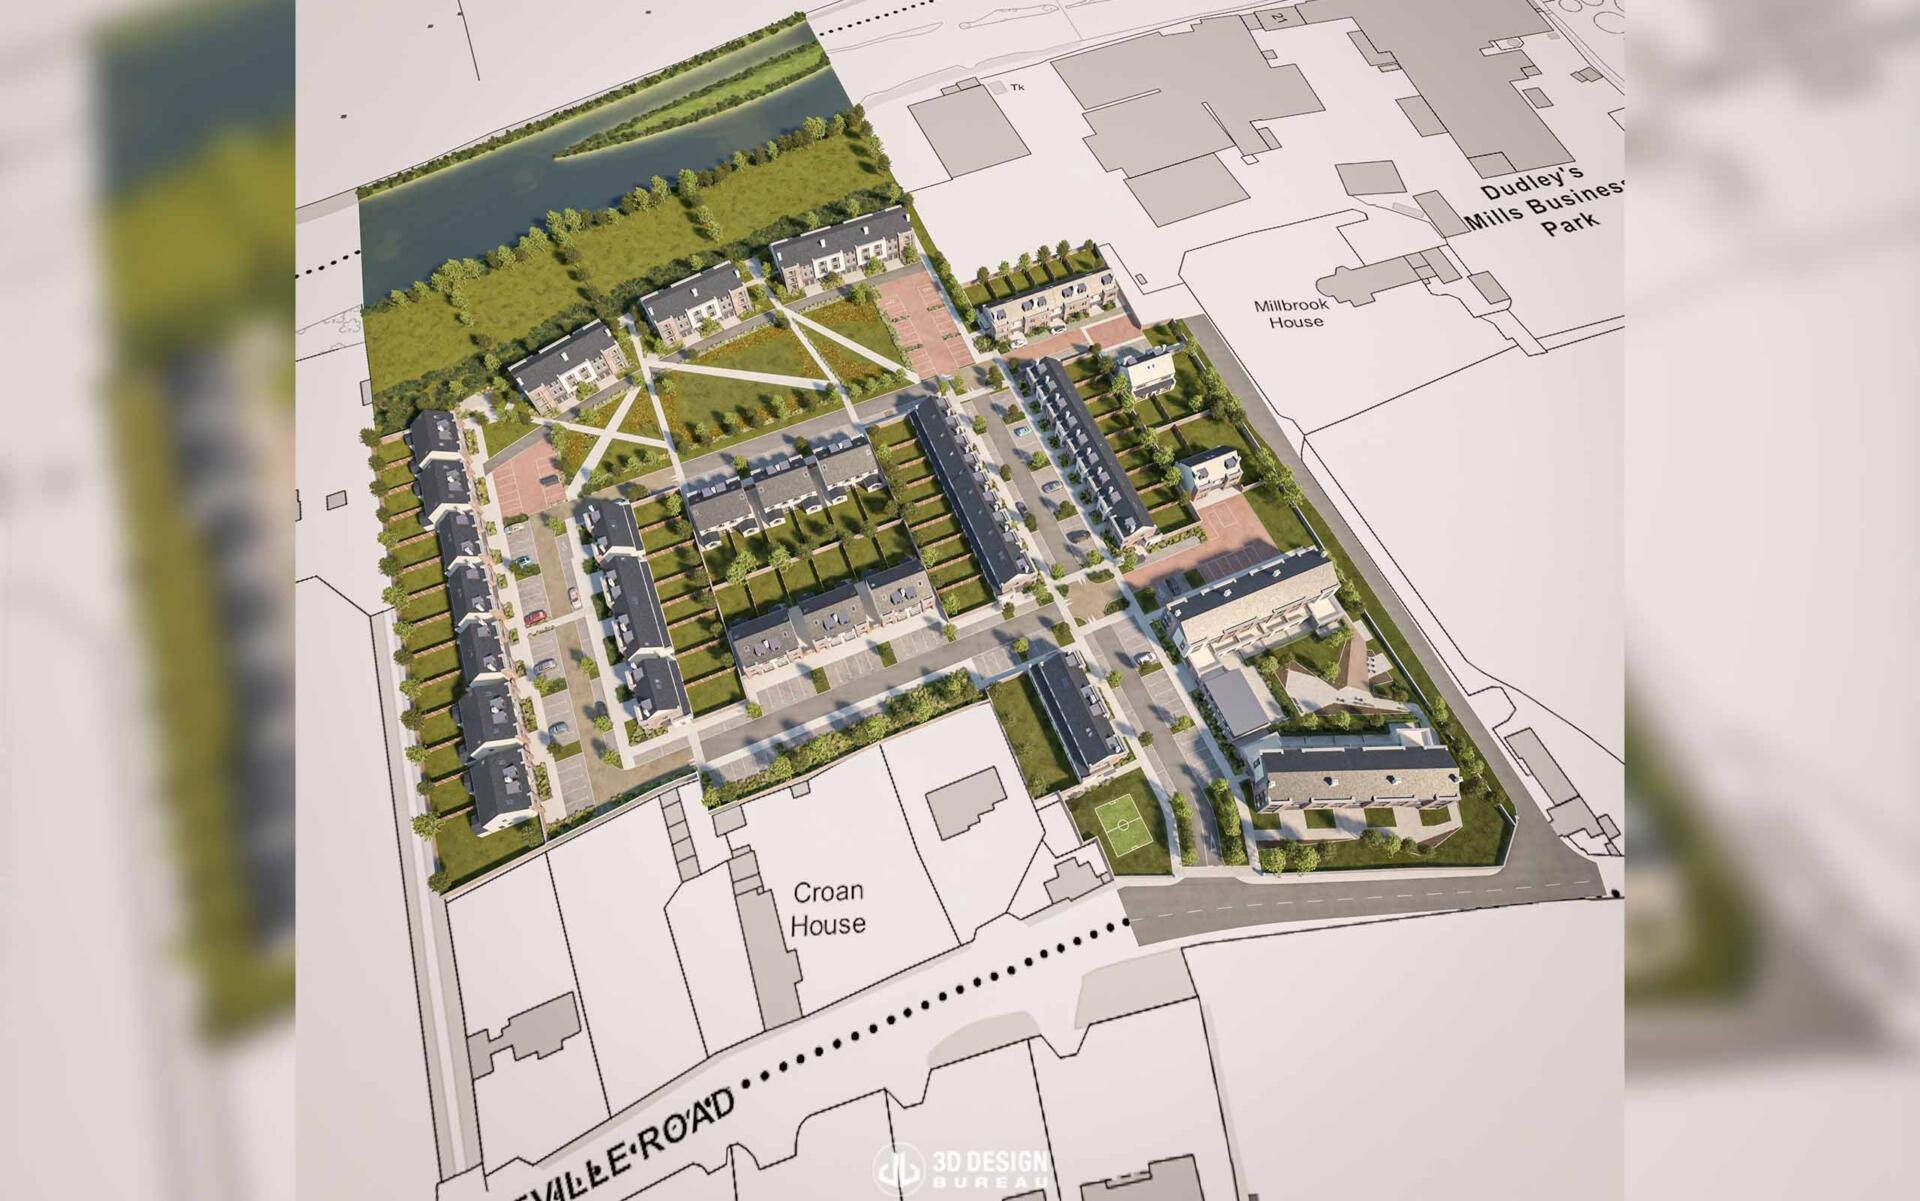 Planning application guide: Design, pre-planning, and public consultation